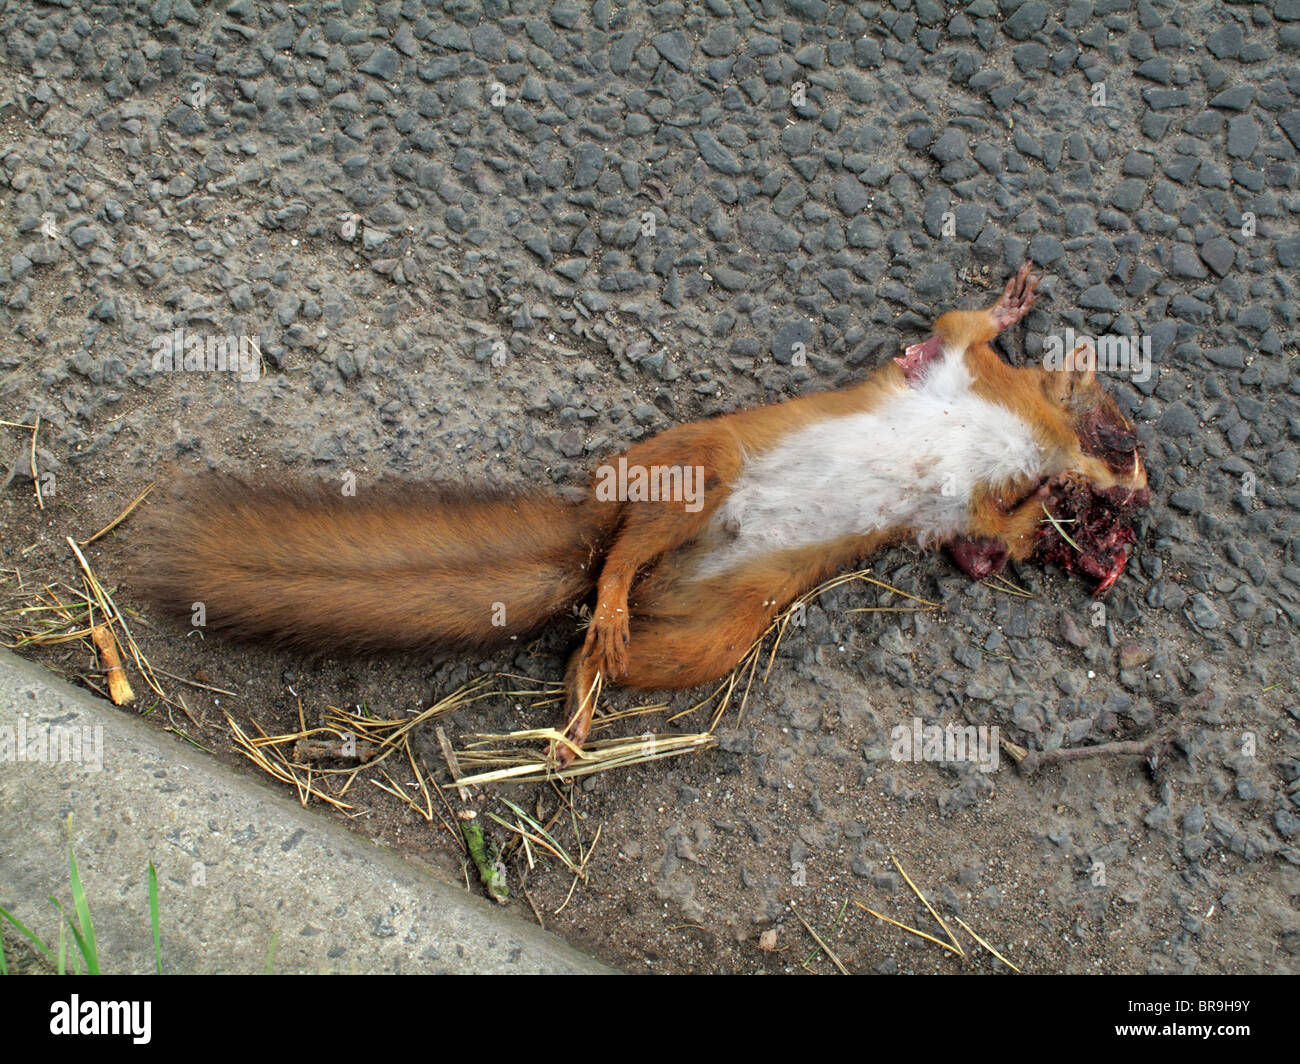 A red squirrel at the edge of the road, having been run over and killed by a passing car. Stock Photo